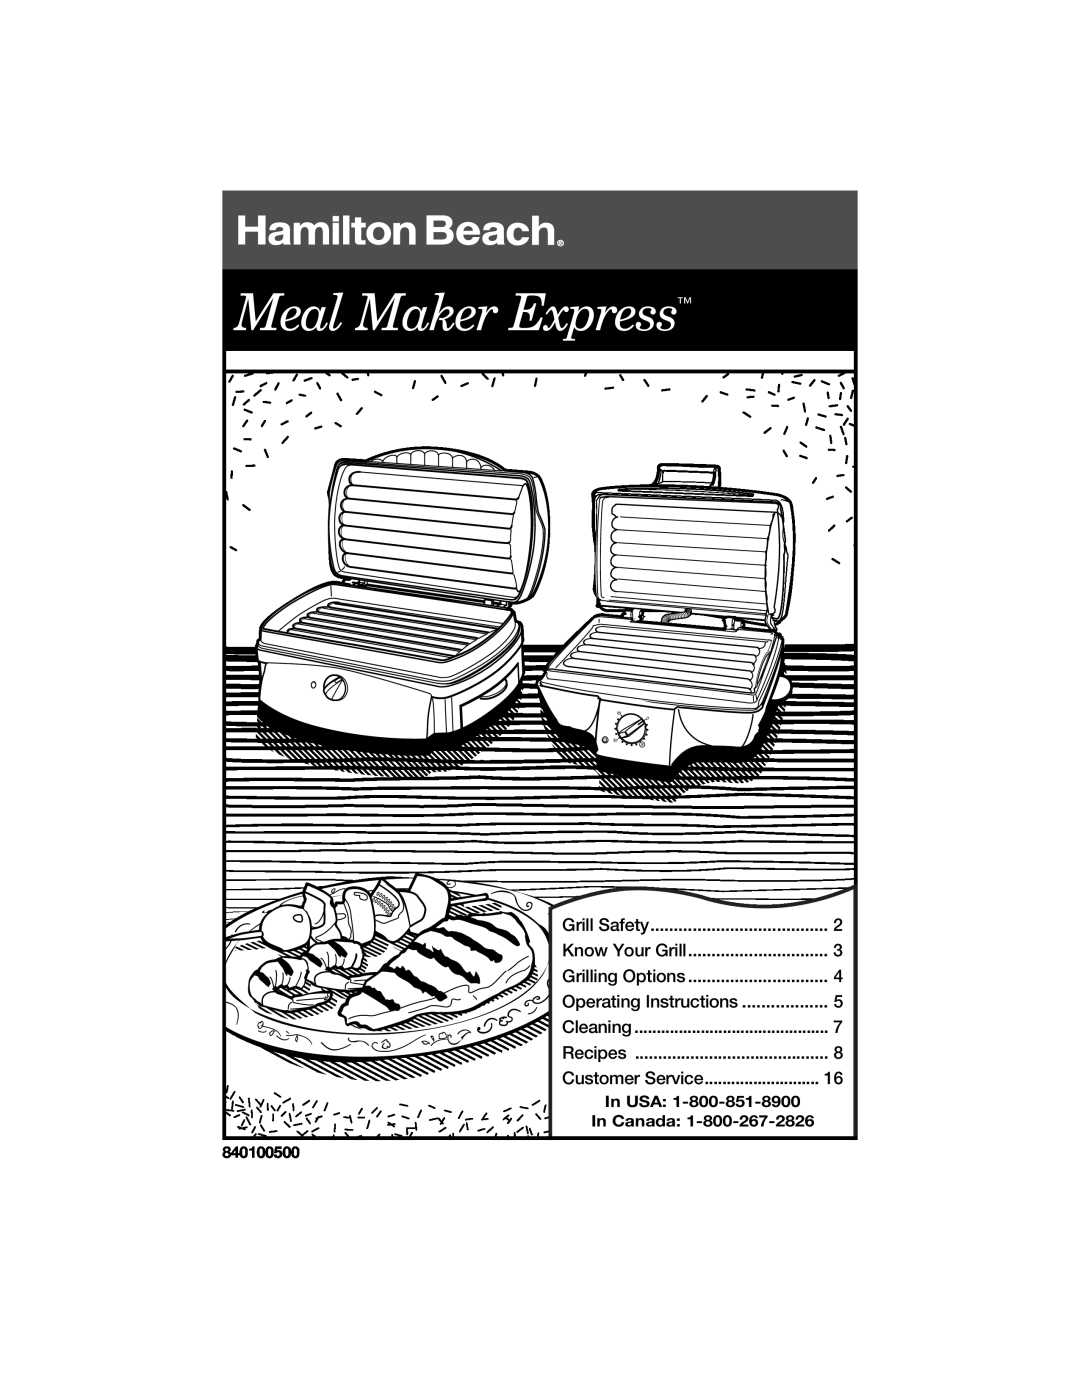 Hamilton Beach 840100500 manual Meal Maker Express, Know Your Grill, Grilling Options, Operating Instructions, In USA 